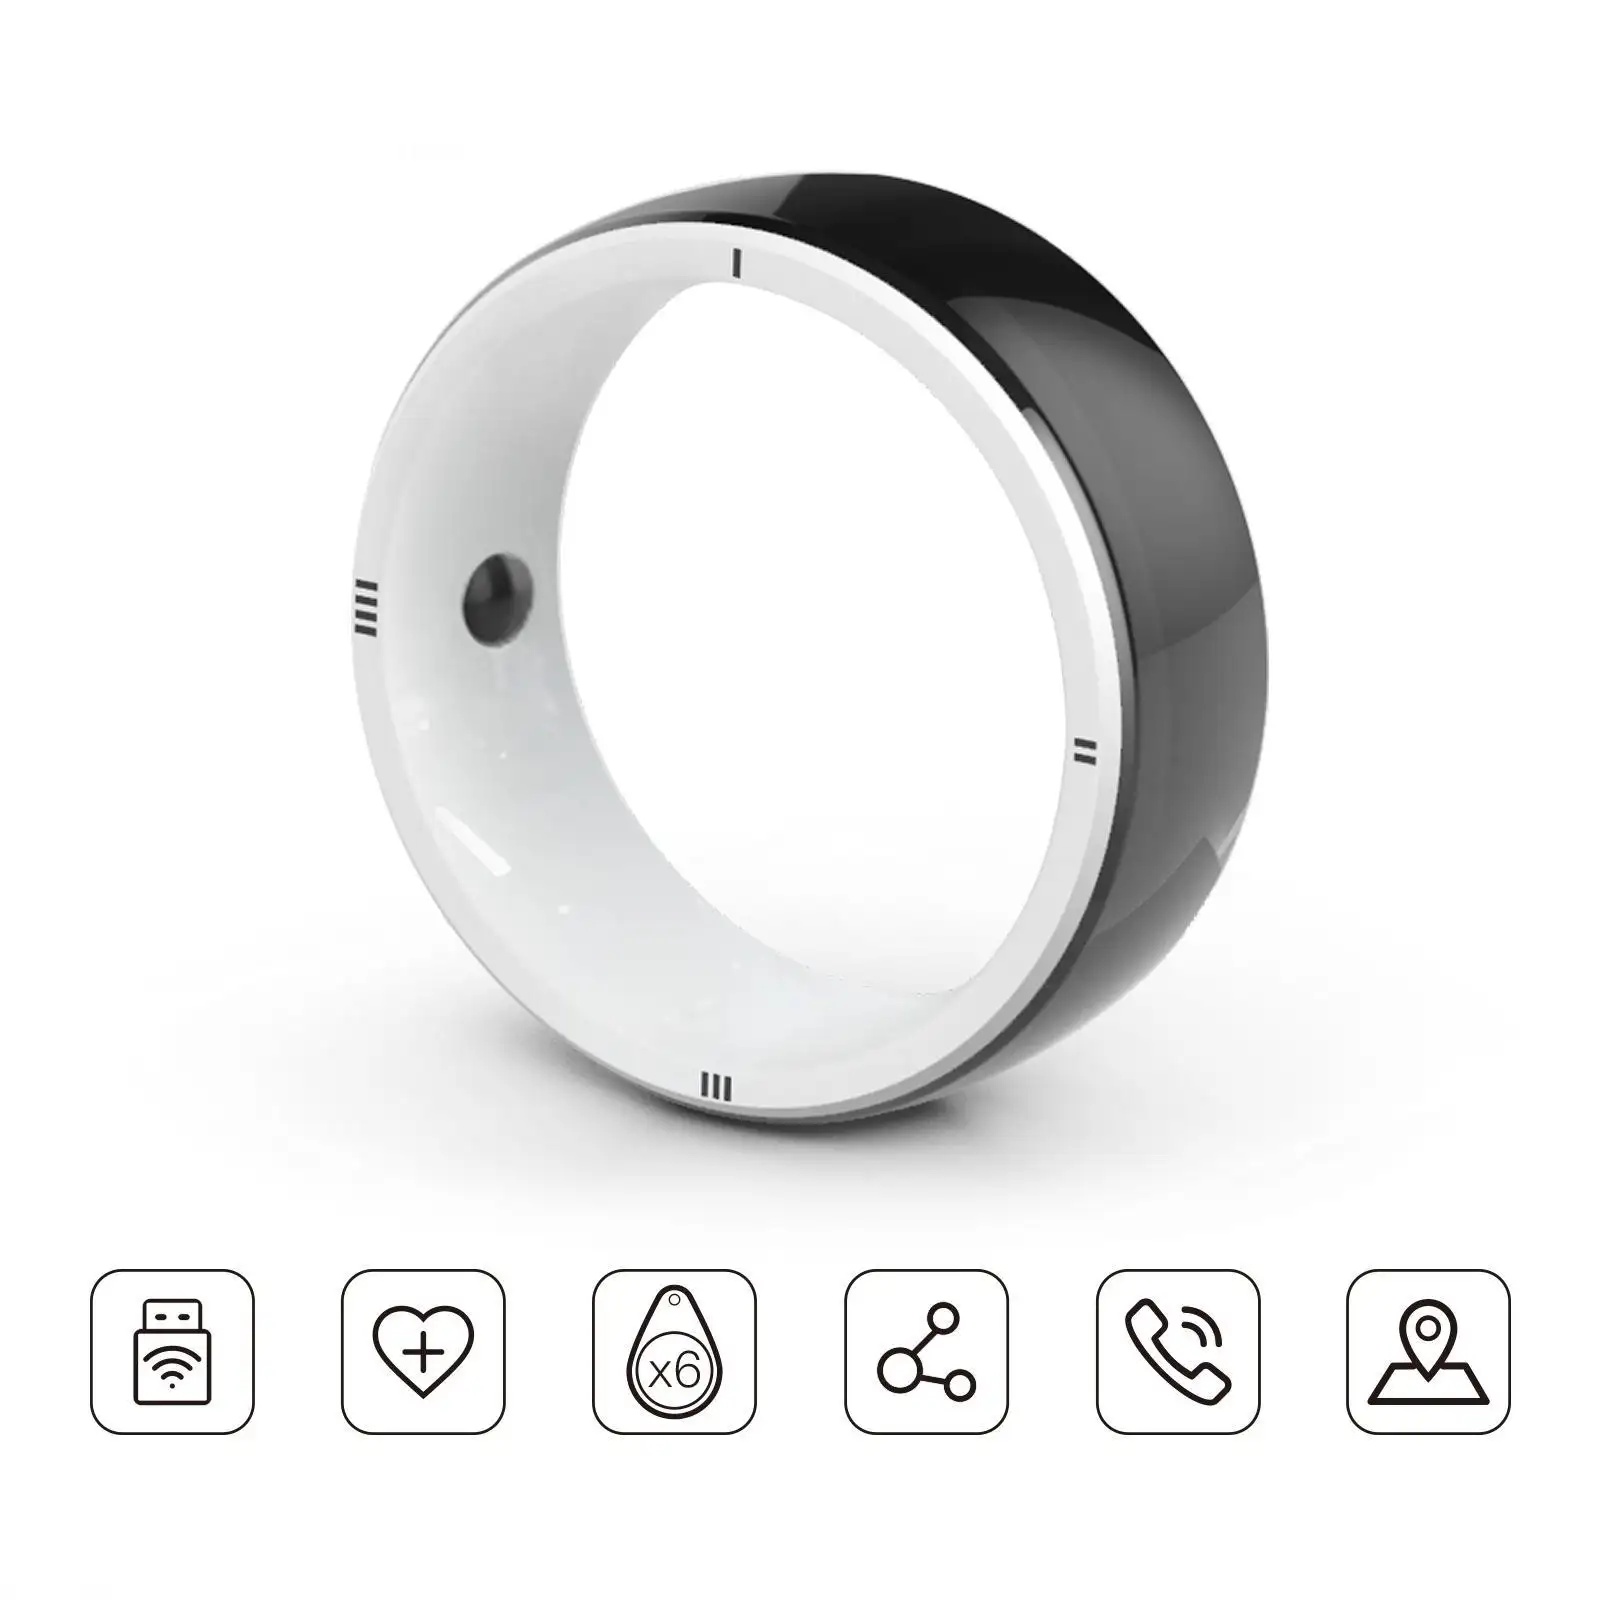 JAKCOM R5 Smart Ring New Smart Ring Best gift with sound blaster sb1550 bf movie charger and speaker simpex photo studio light